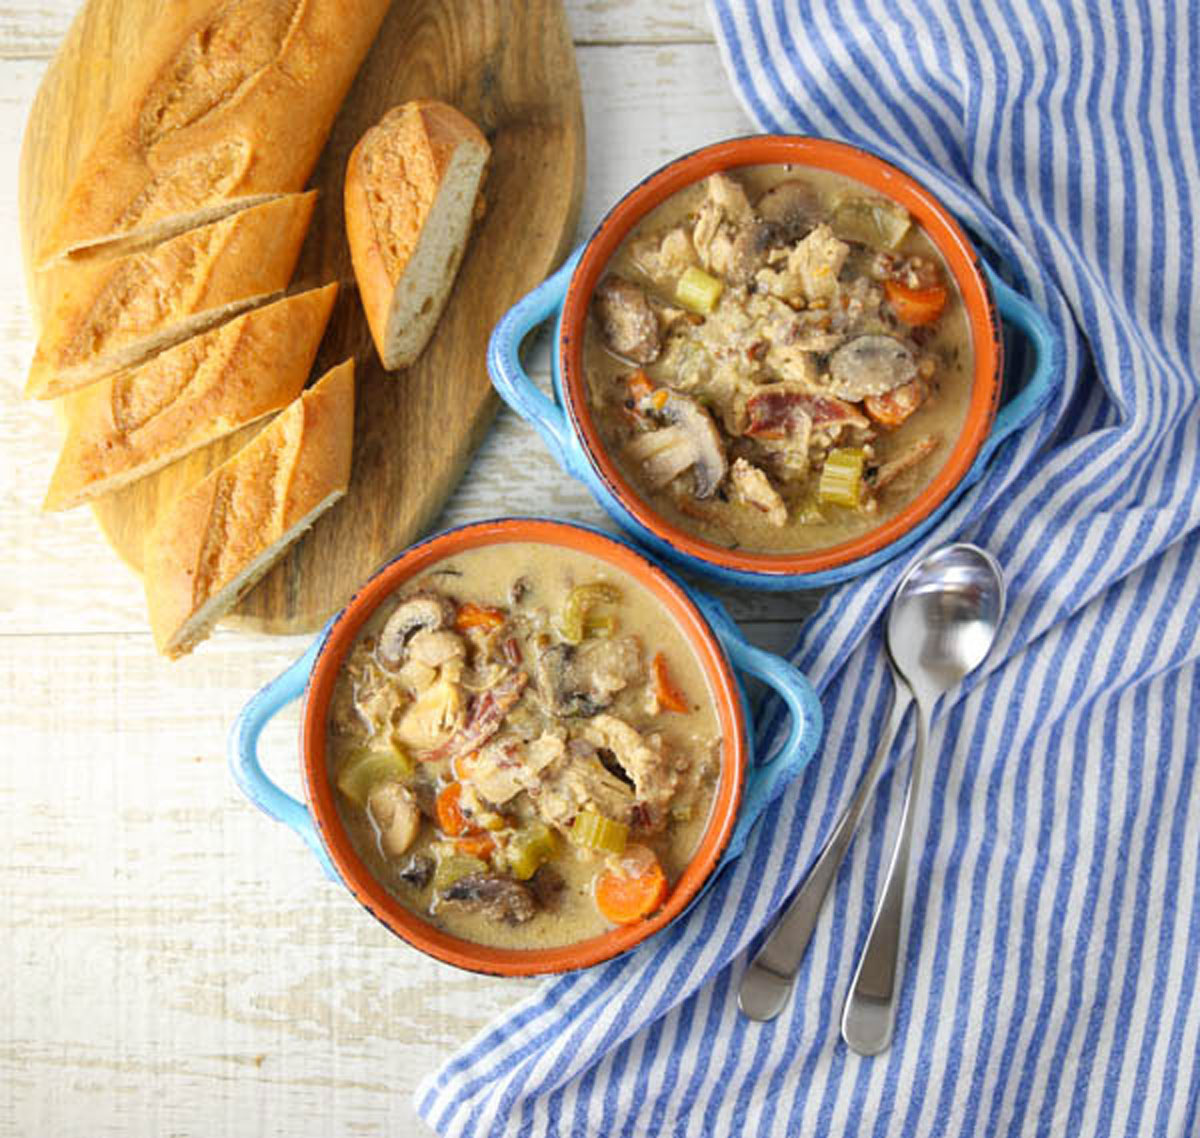 Gluten-free Slow Cooker Turkey and Rice Soup